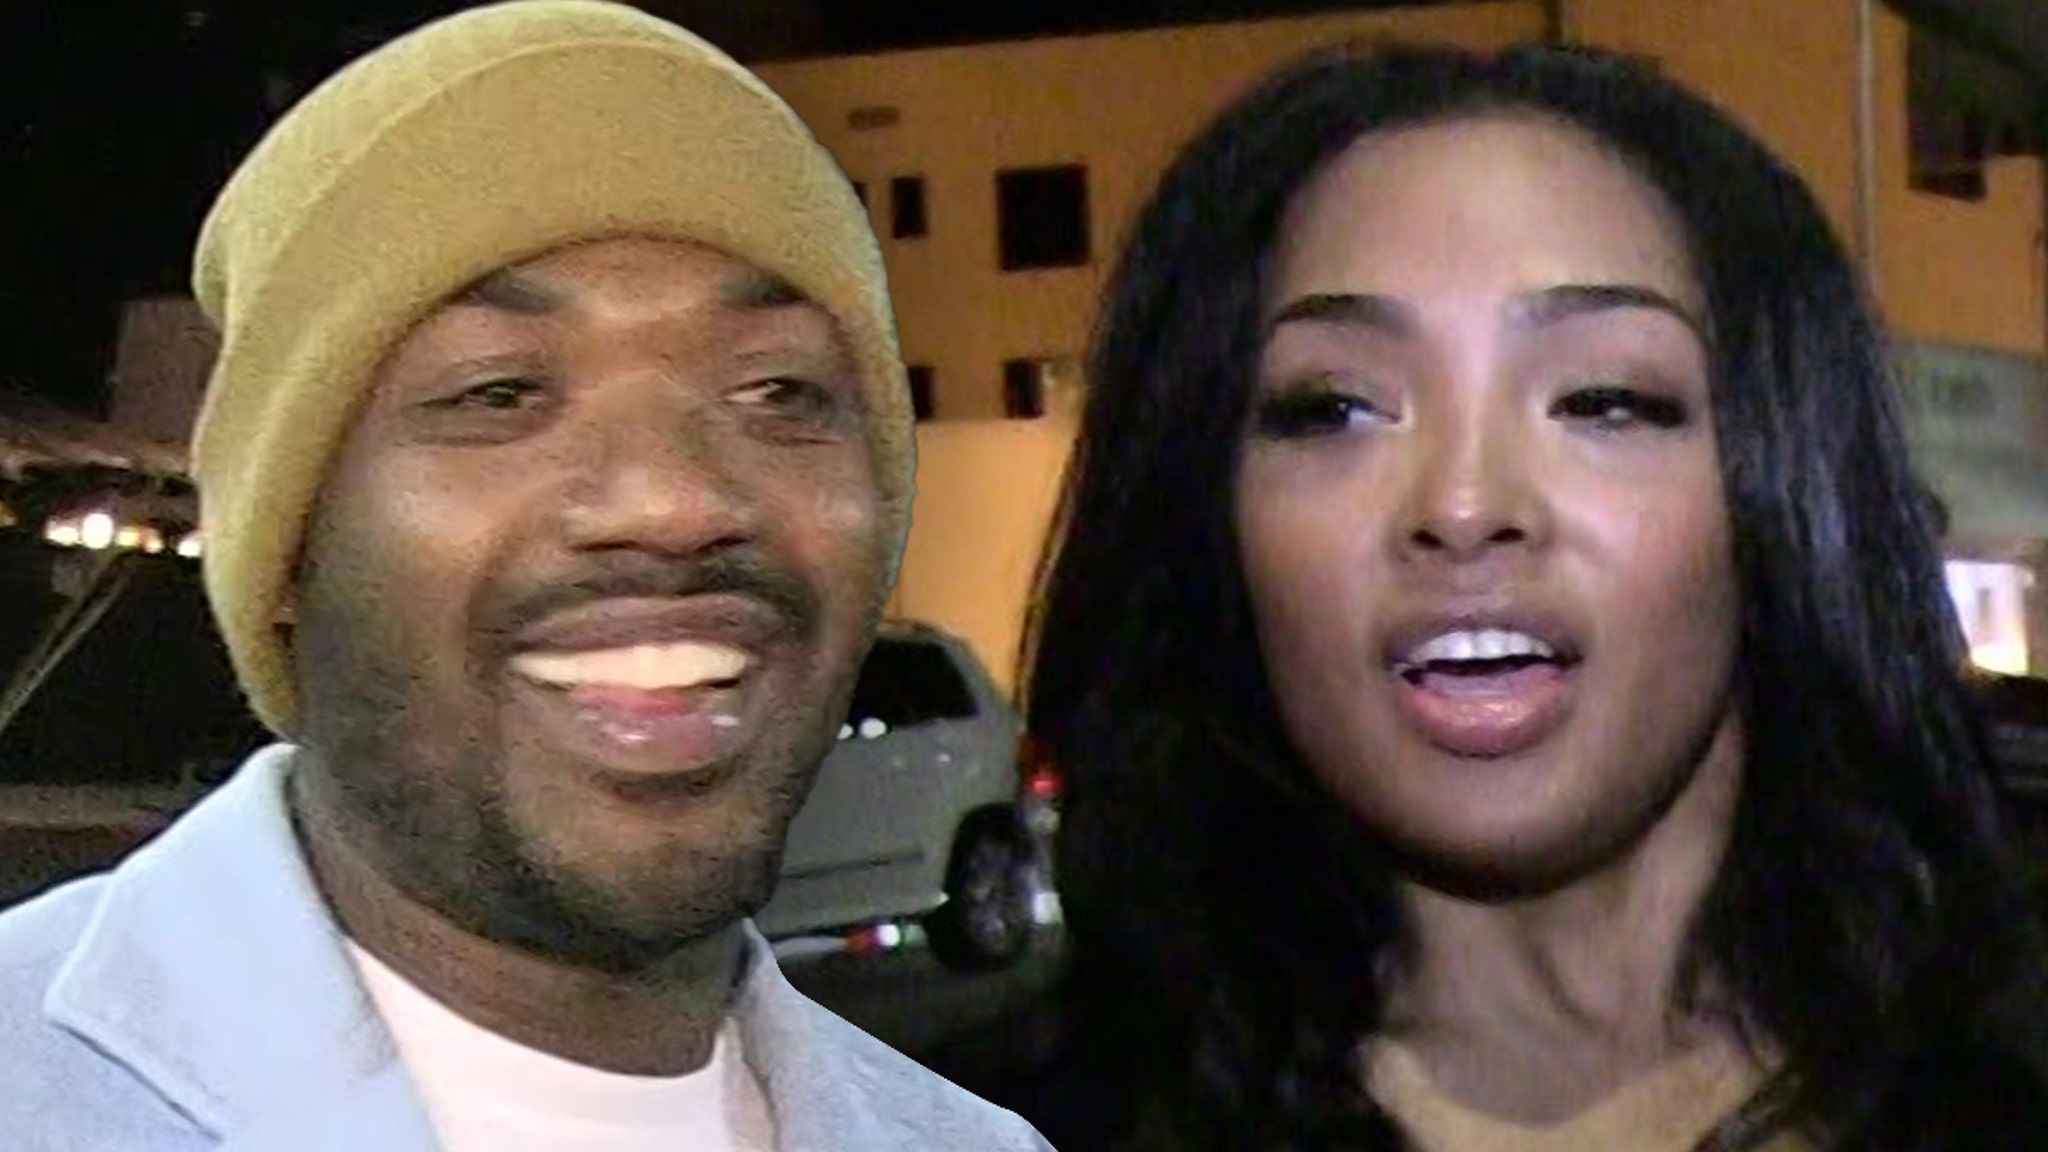 Ray J Files for Annulment of Divorce From Wife, Princess Love